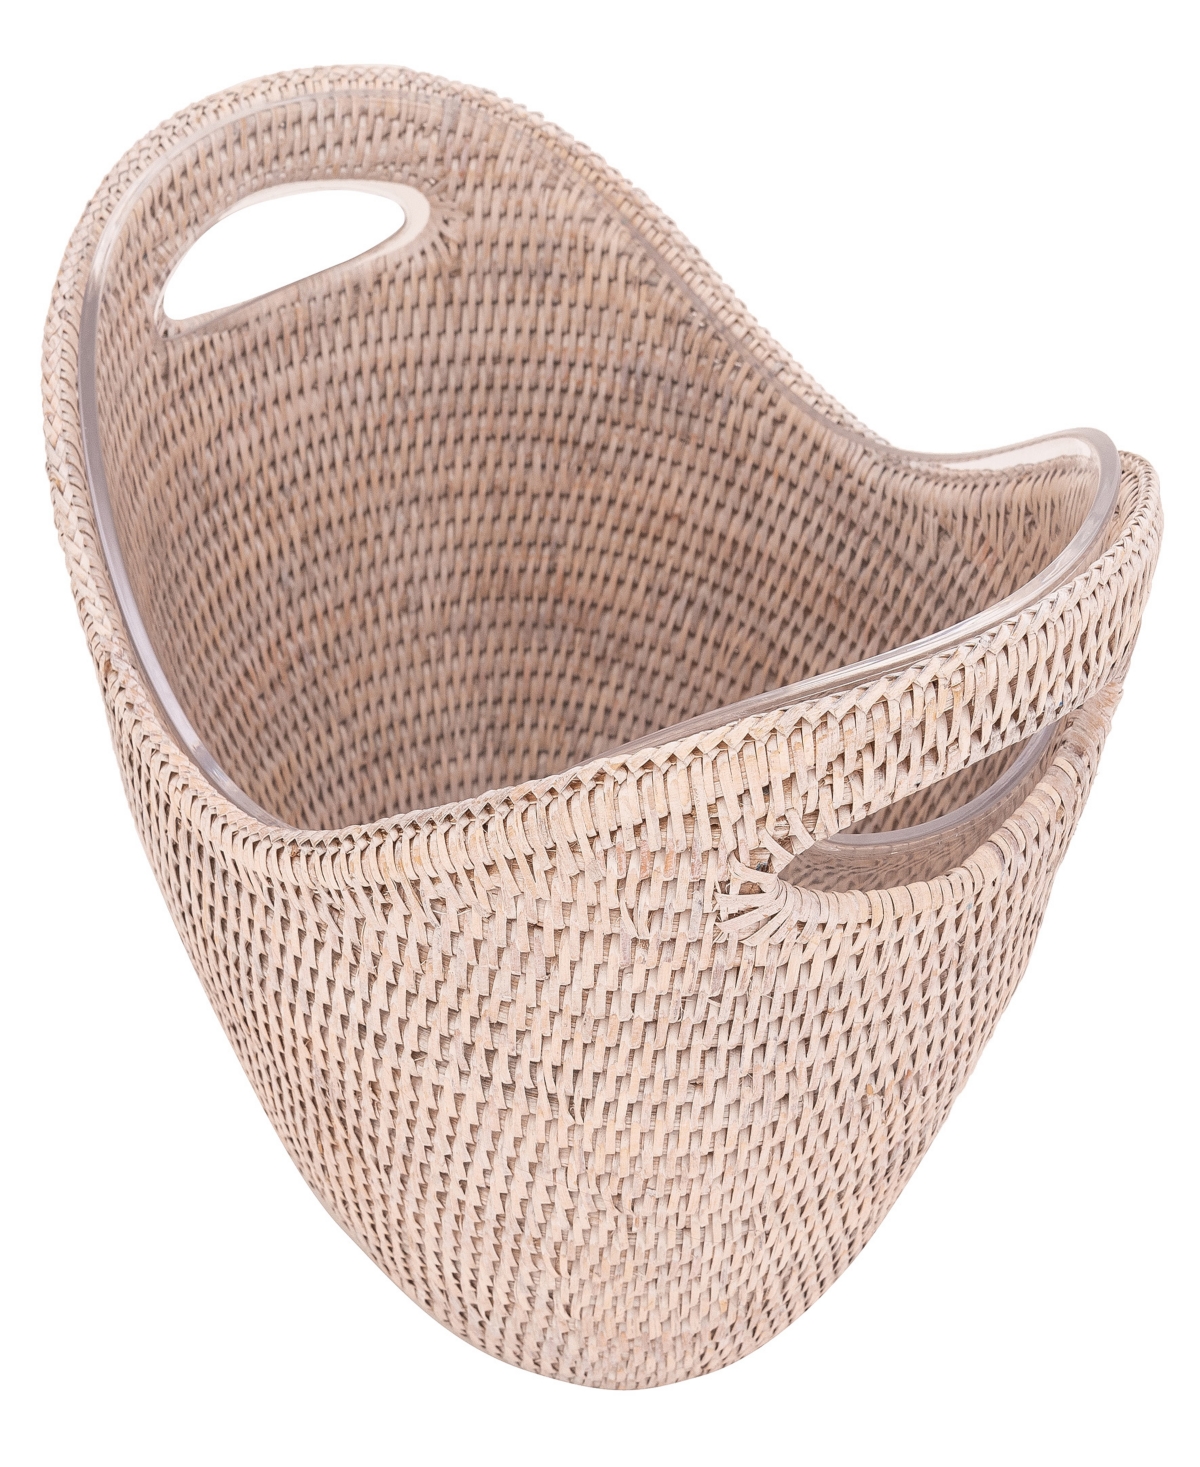 Shop Artifacts Trading Company Rattan Champagne Bucket With Acrylic Insert In White Wash